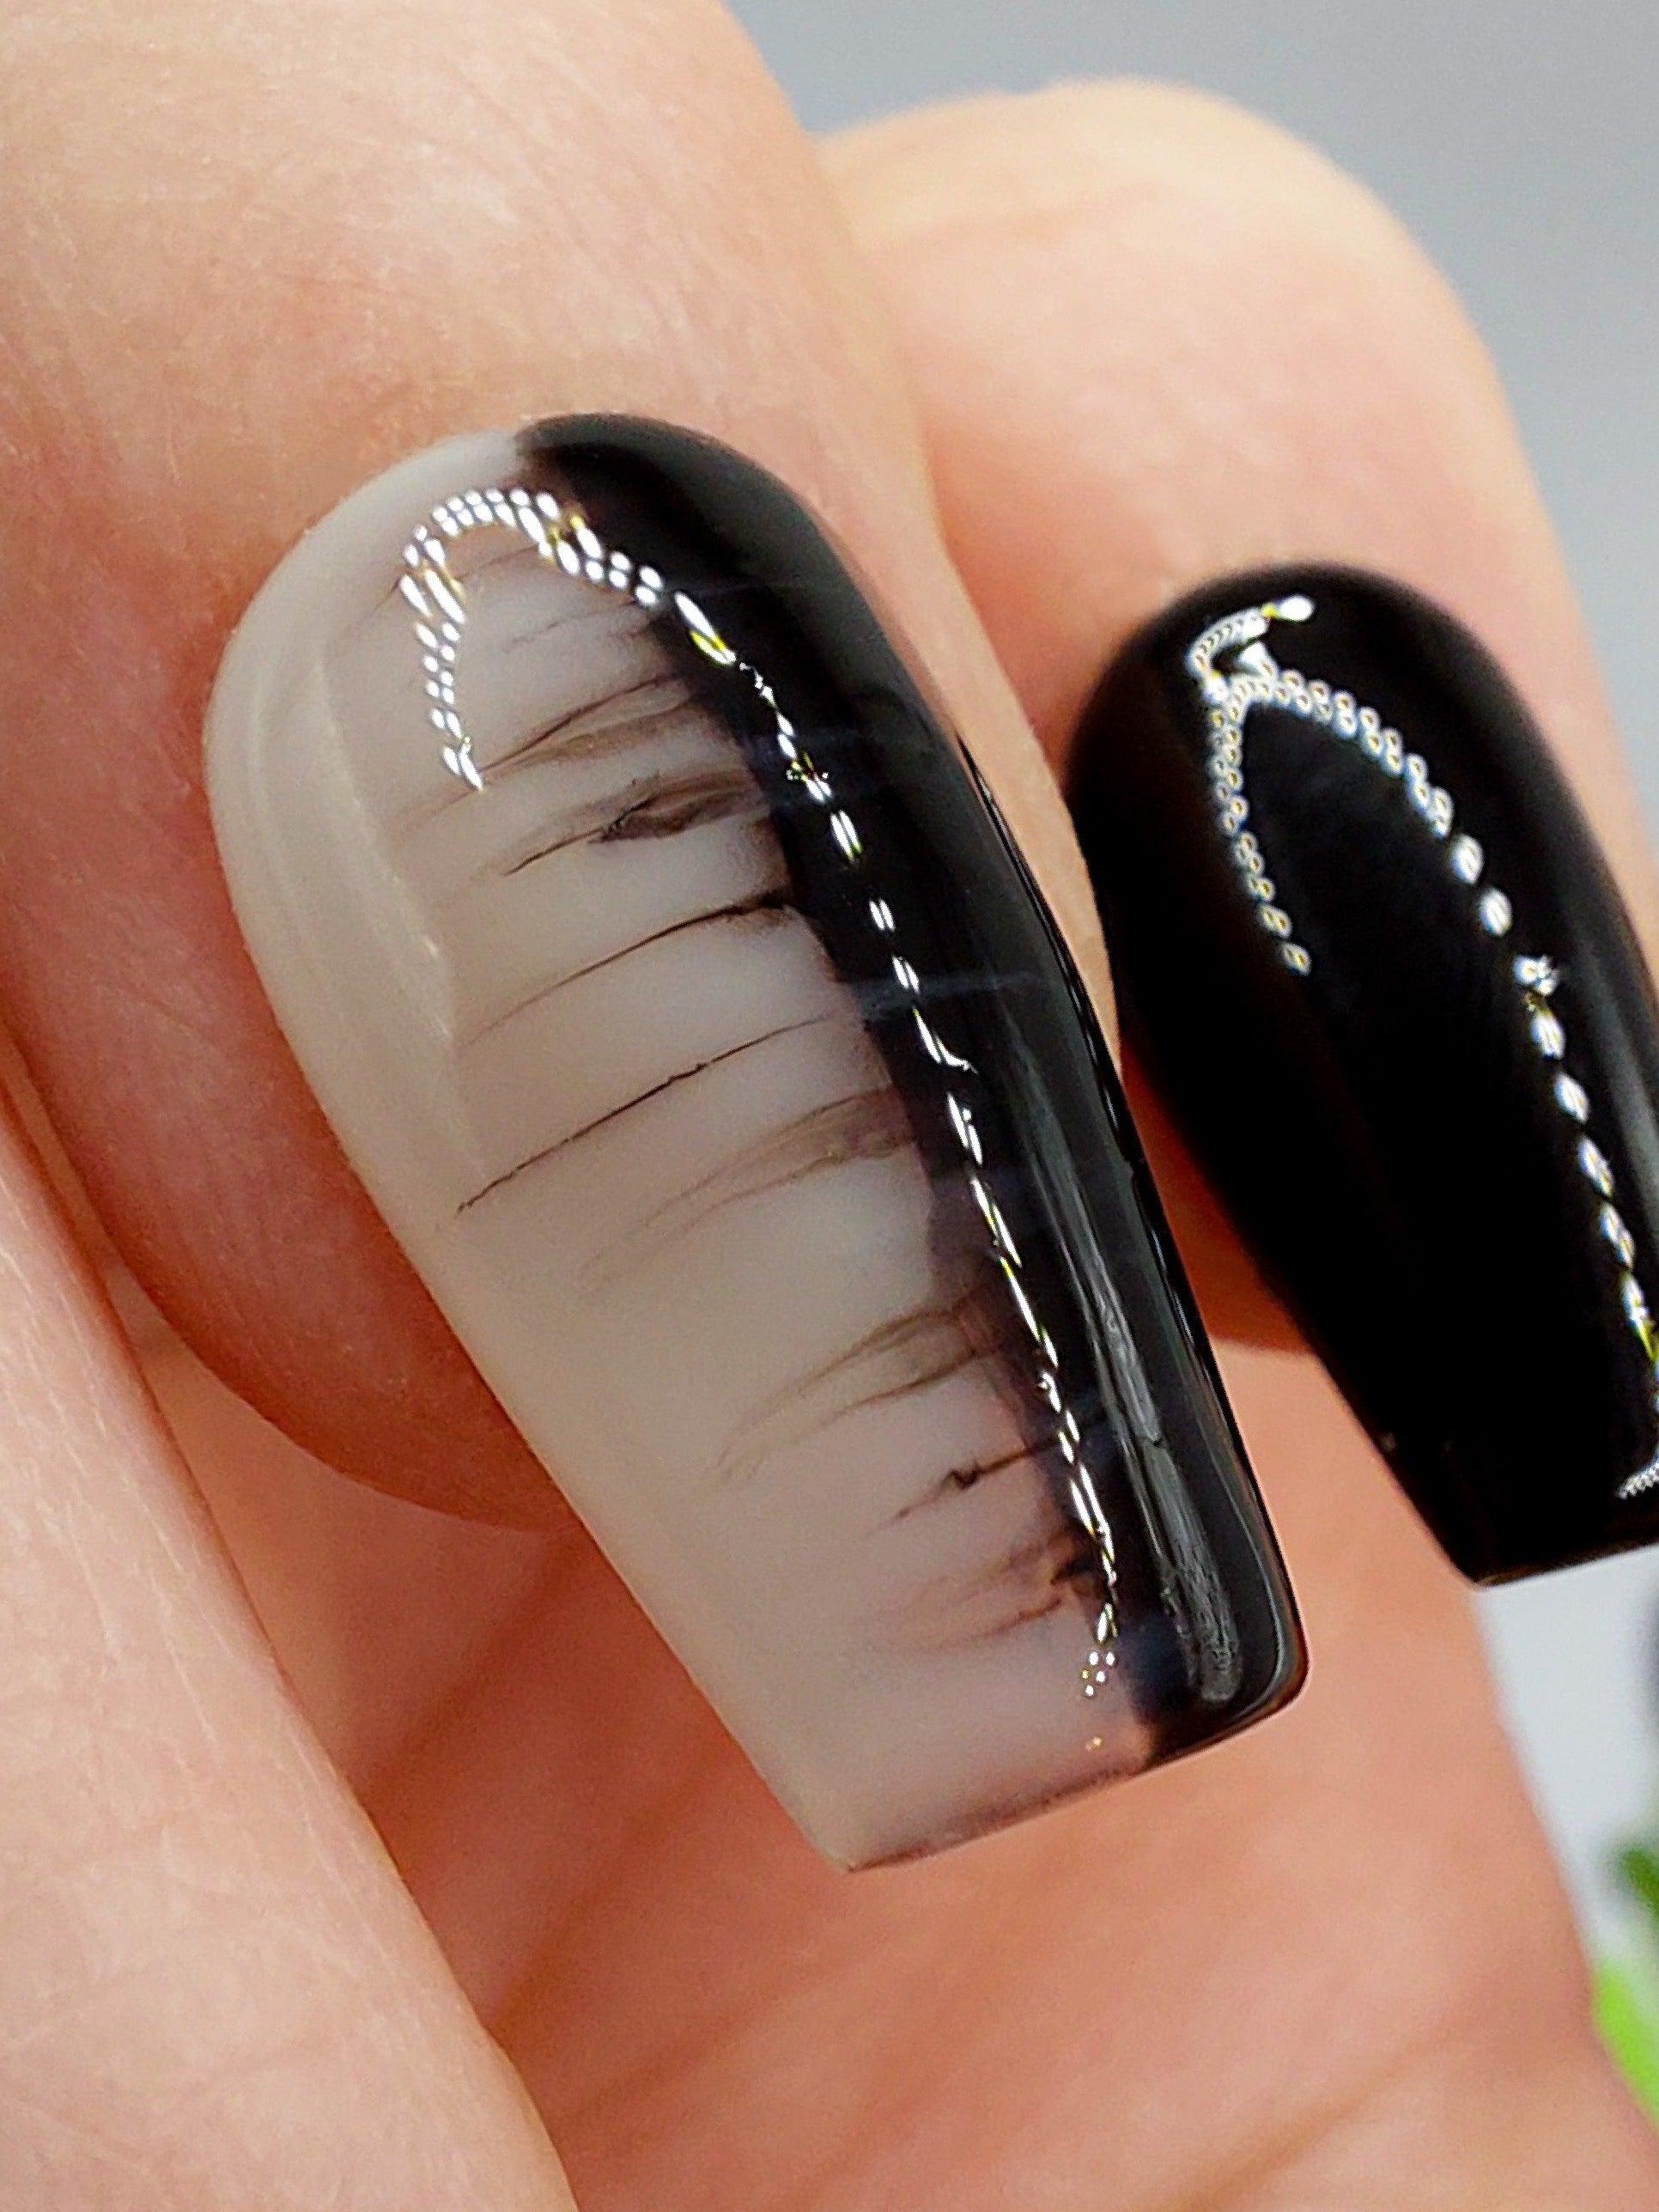 SET Black and White Ombré nails | ShopLook